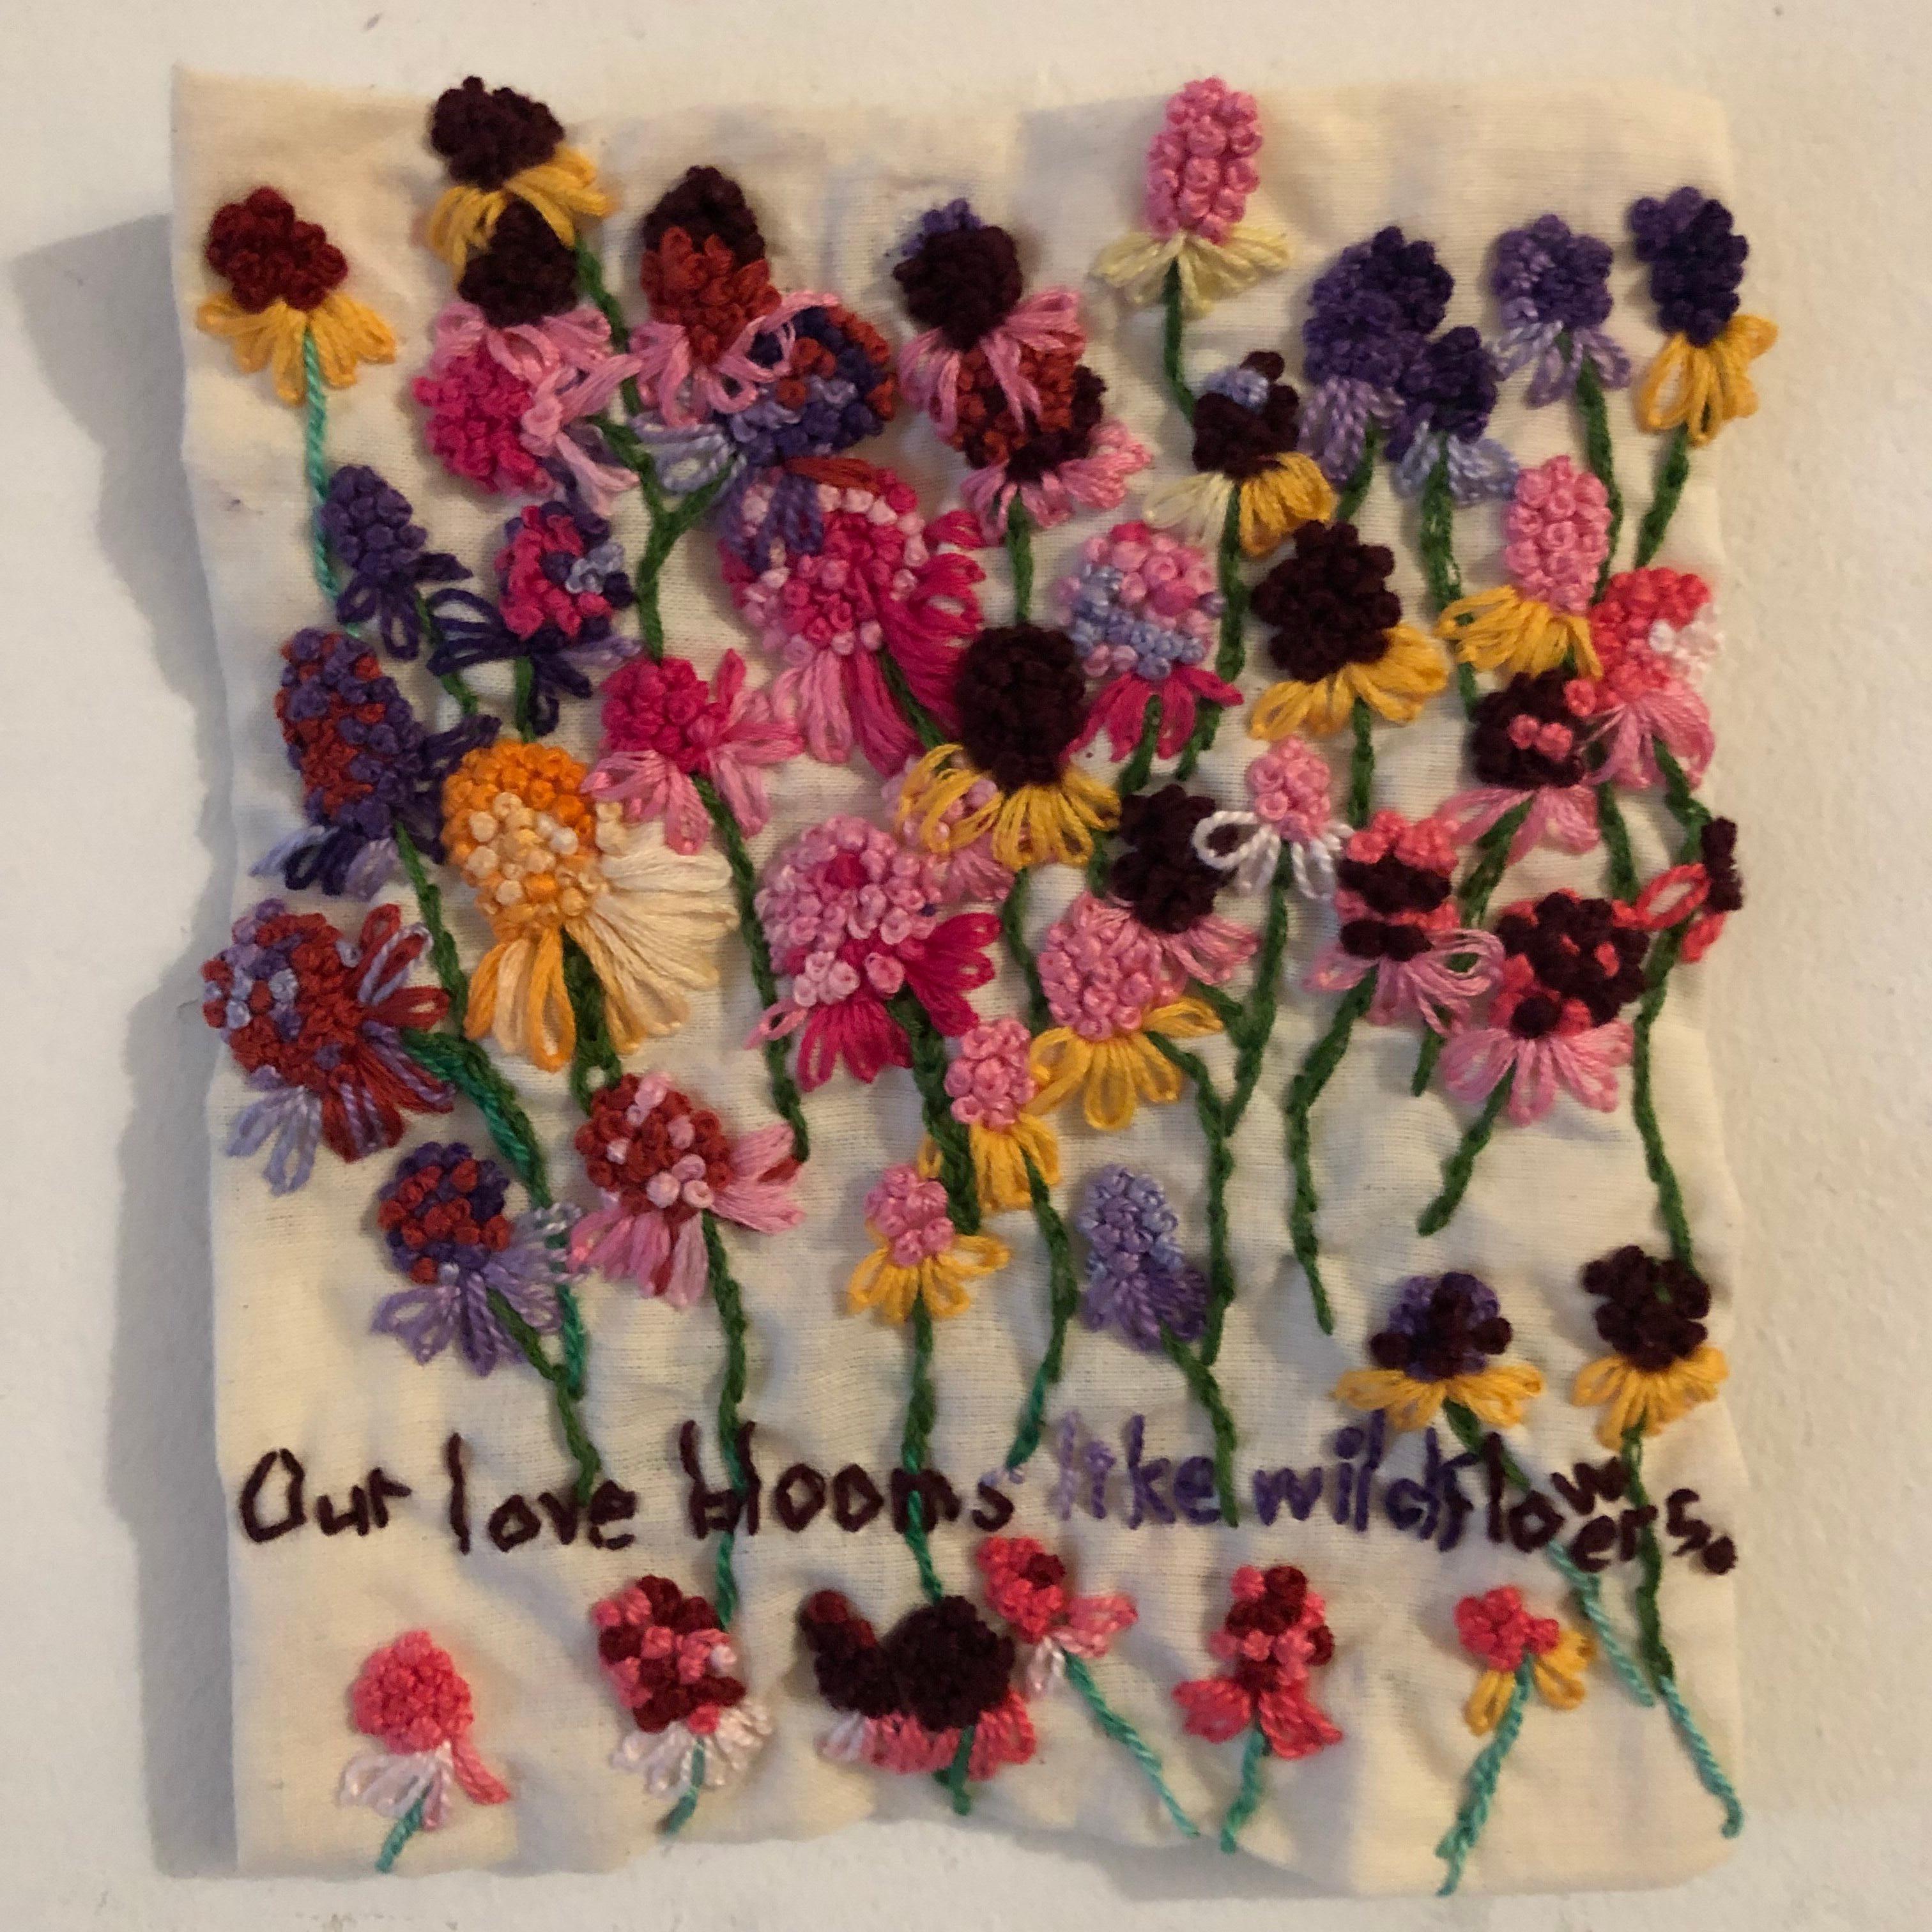 Our love blooms like wild flowers - narrative floral embroidered on fabric  - Mixed Media Art by Iviva Olenick